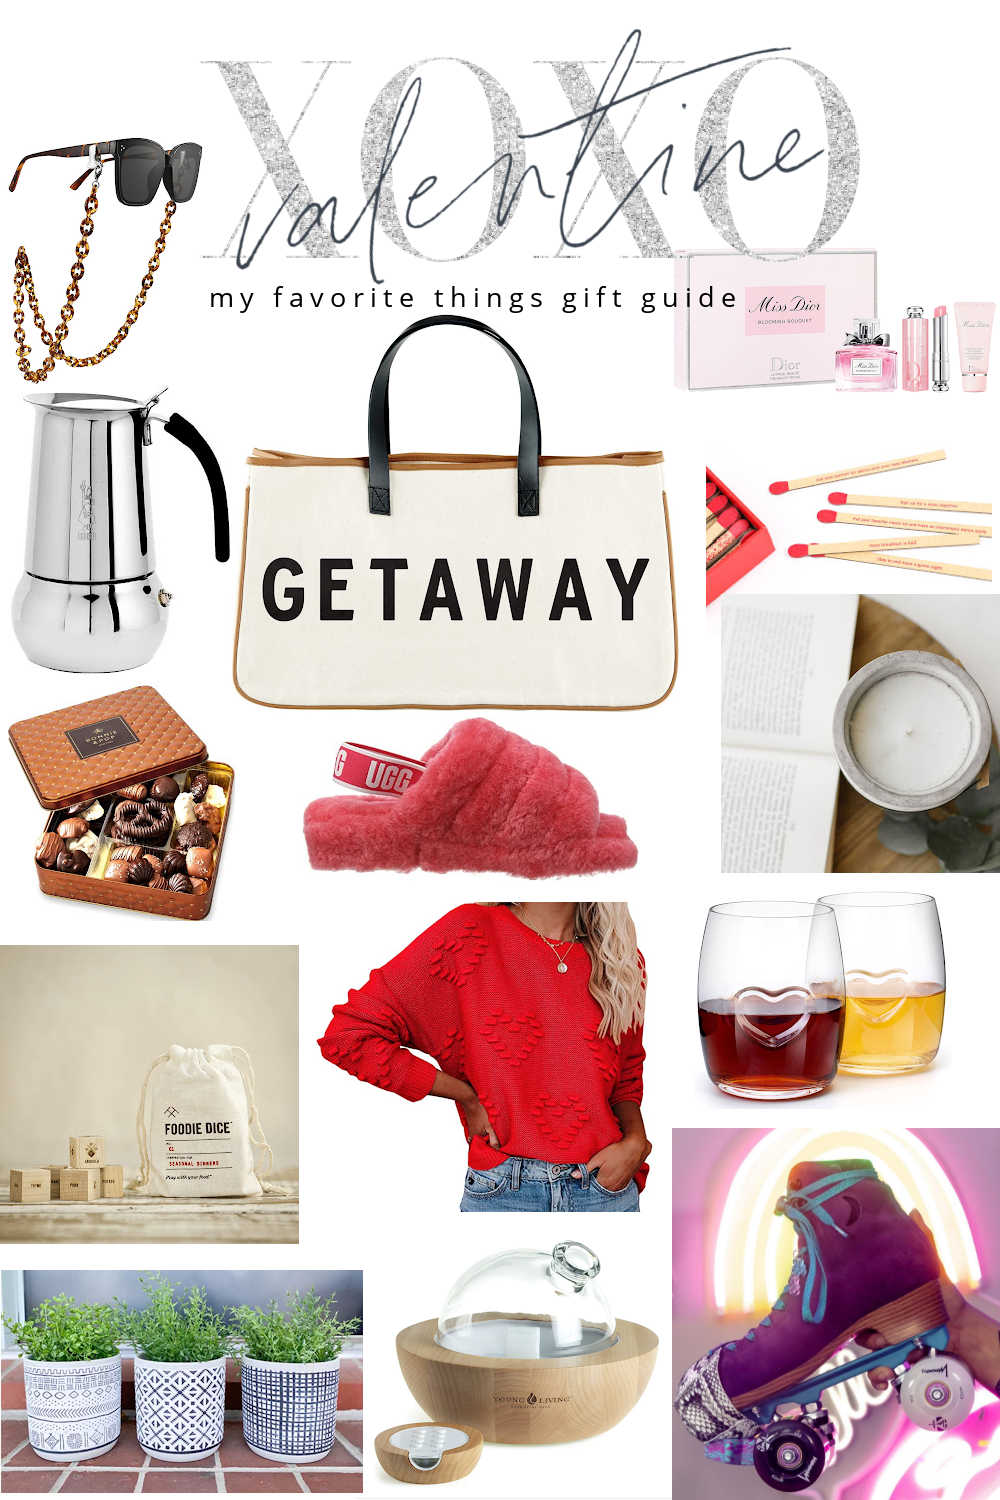 My Favorite Things Valentine Gift Guide! Some great gift ideas for anyone in your life and a great list to send to your husband!